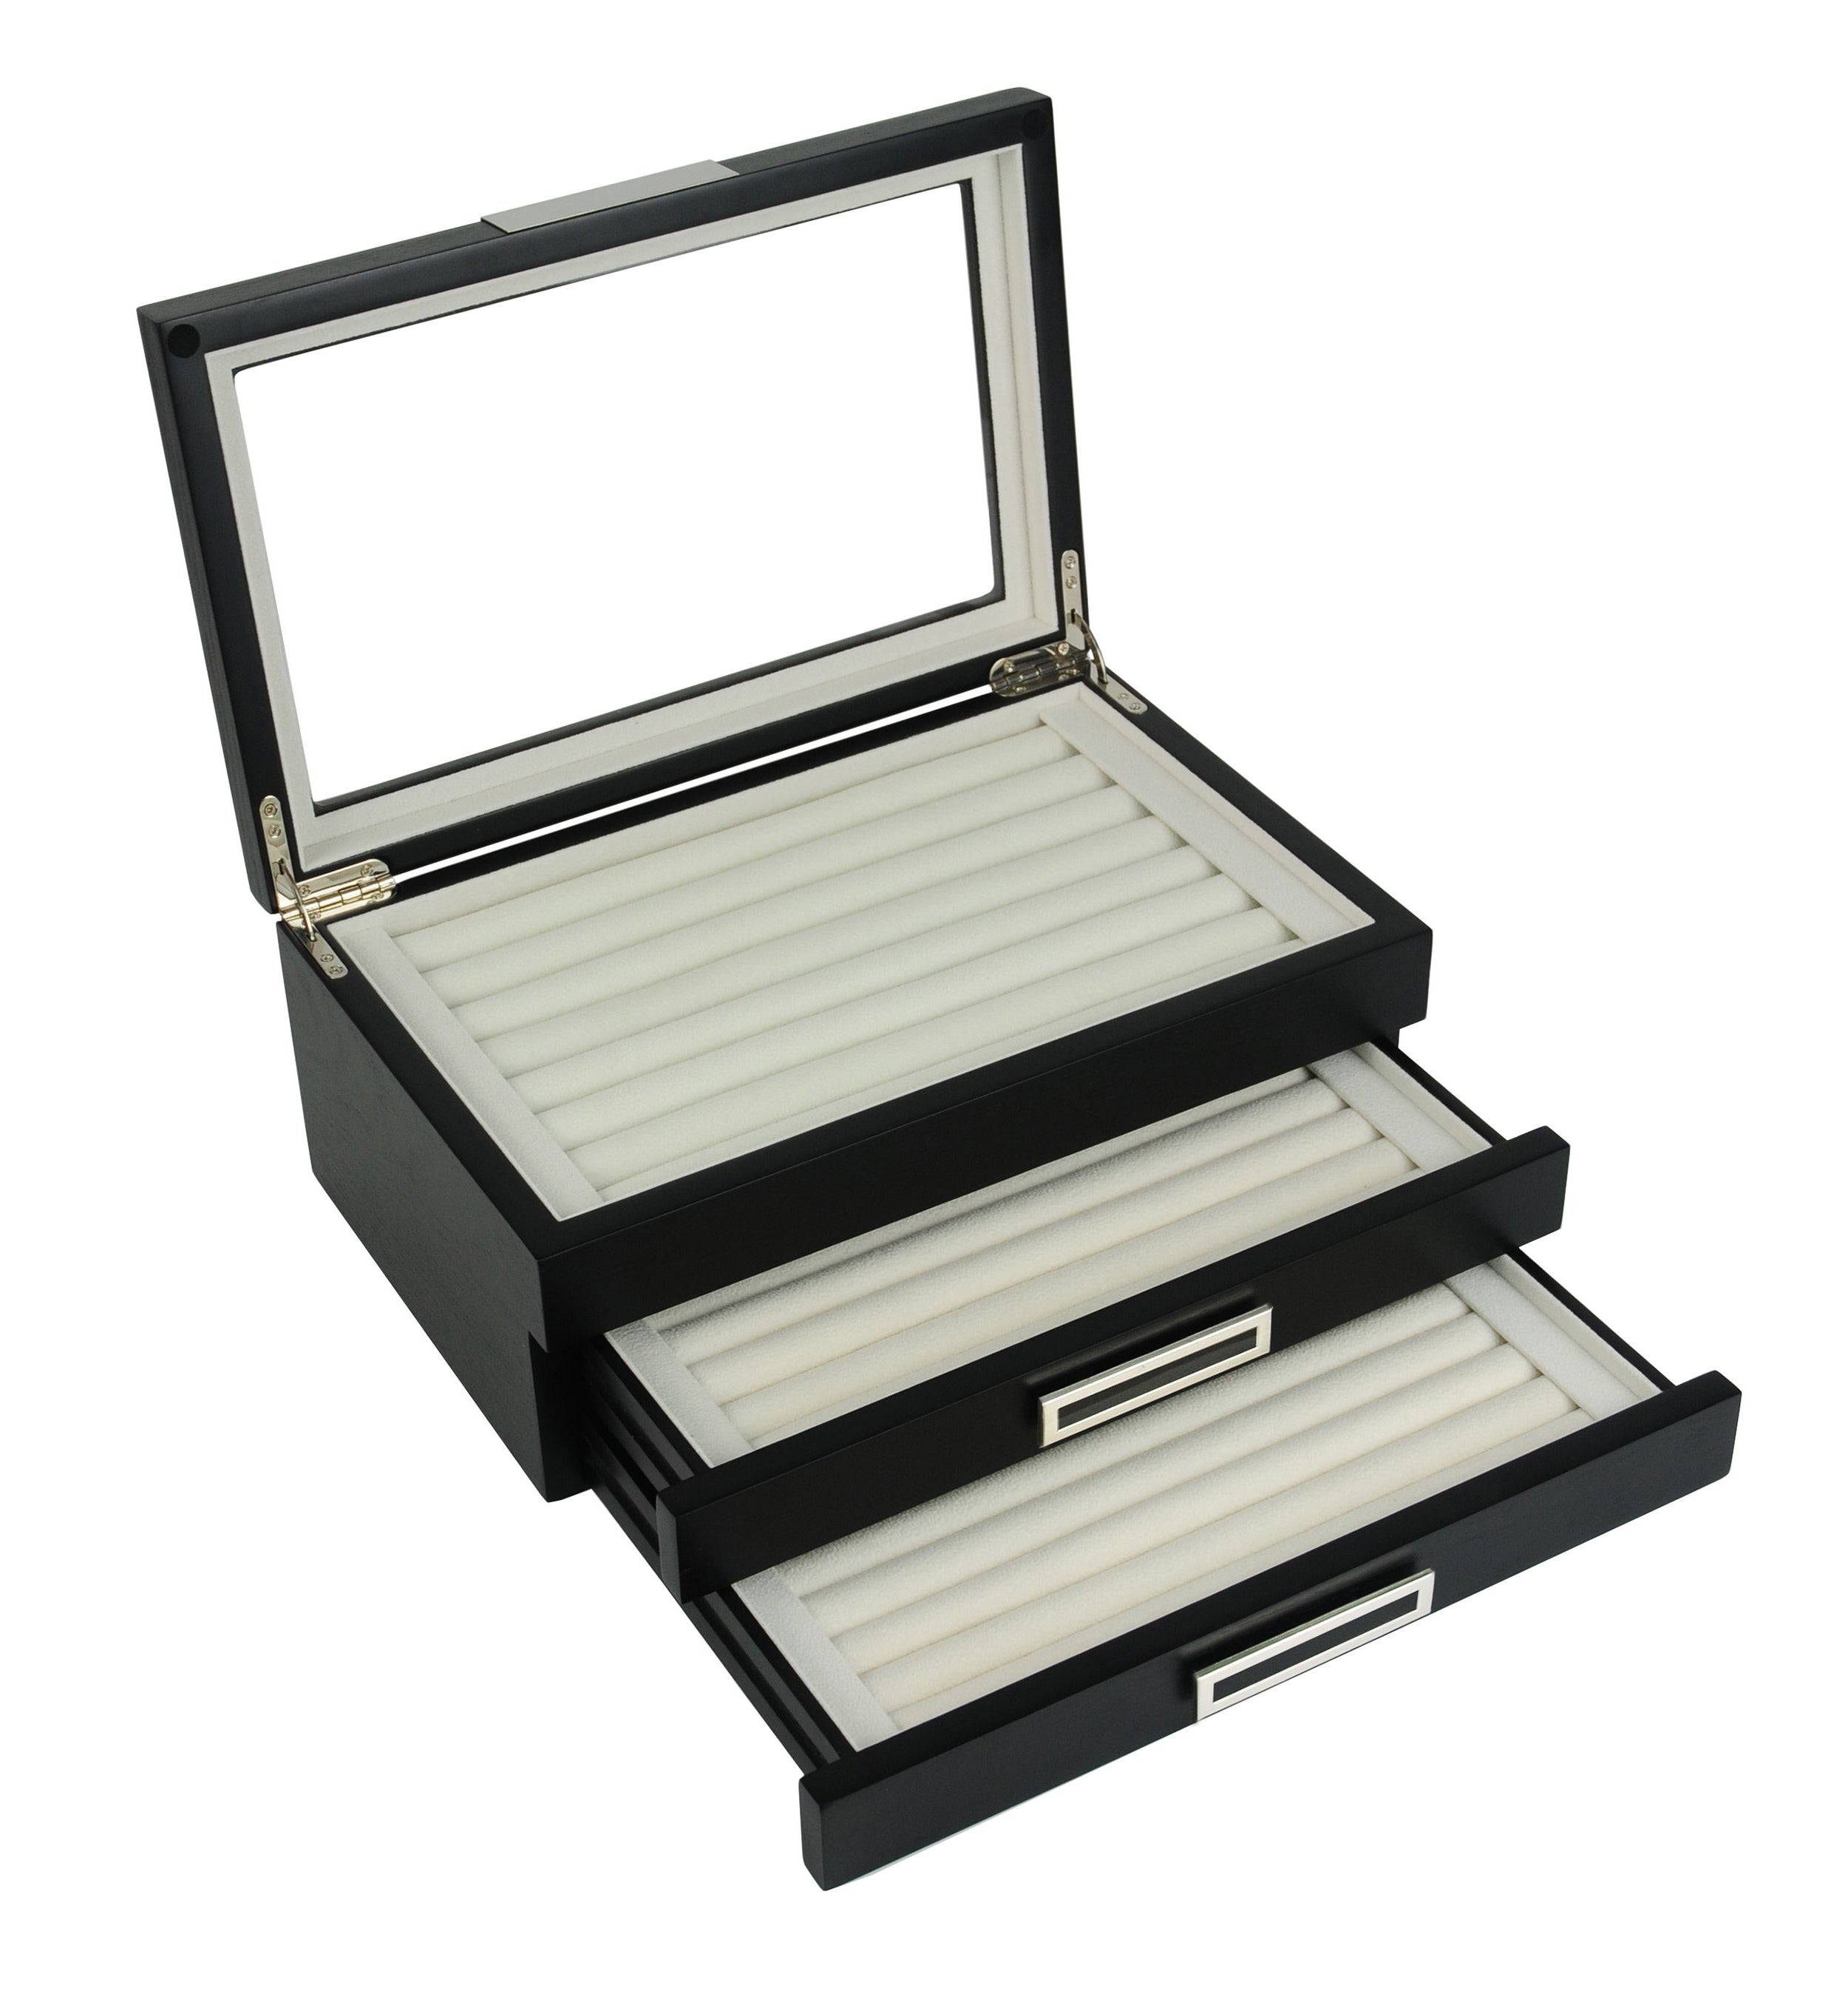 TIMELYBUYS 10 Piece Black Ebony Wood Pen Display Case Storage and Fountain Pen Collector Large Organizer Box with Glass Window Display Case